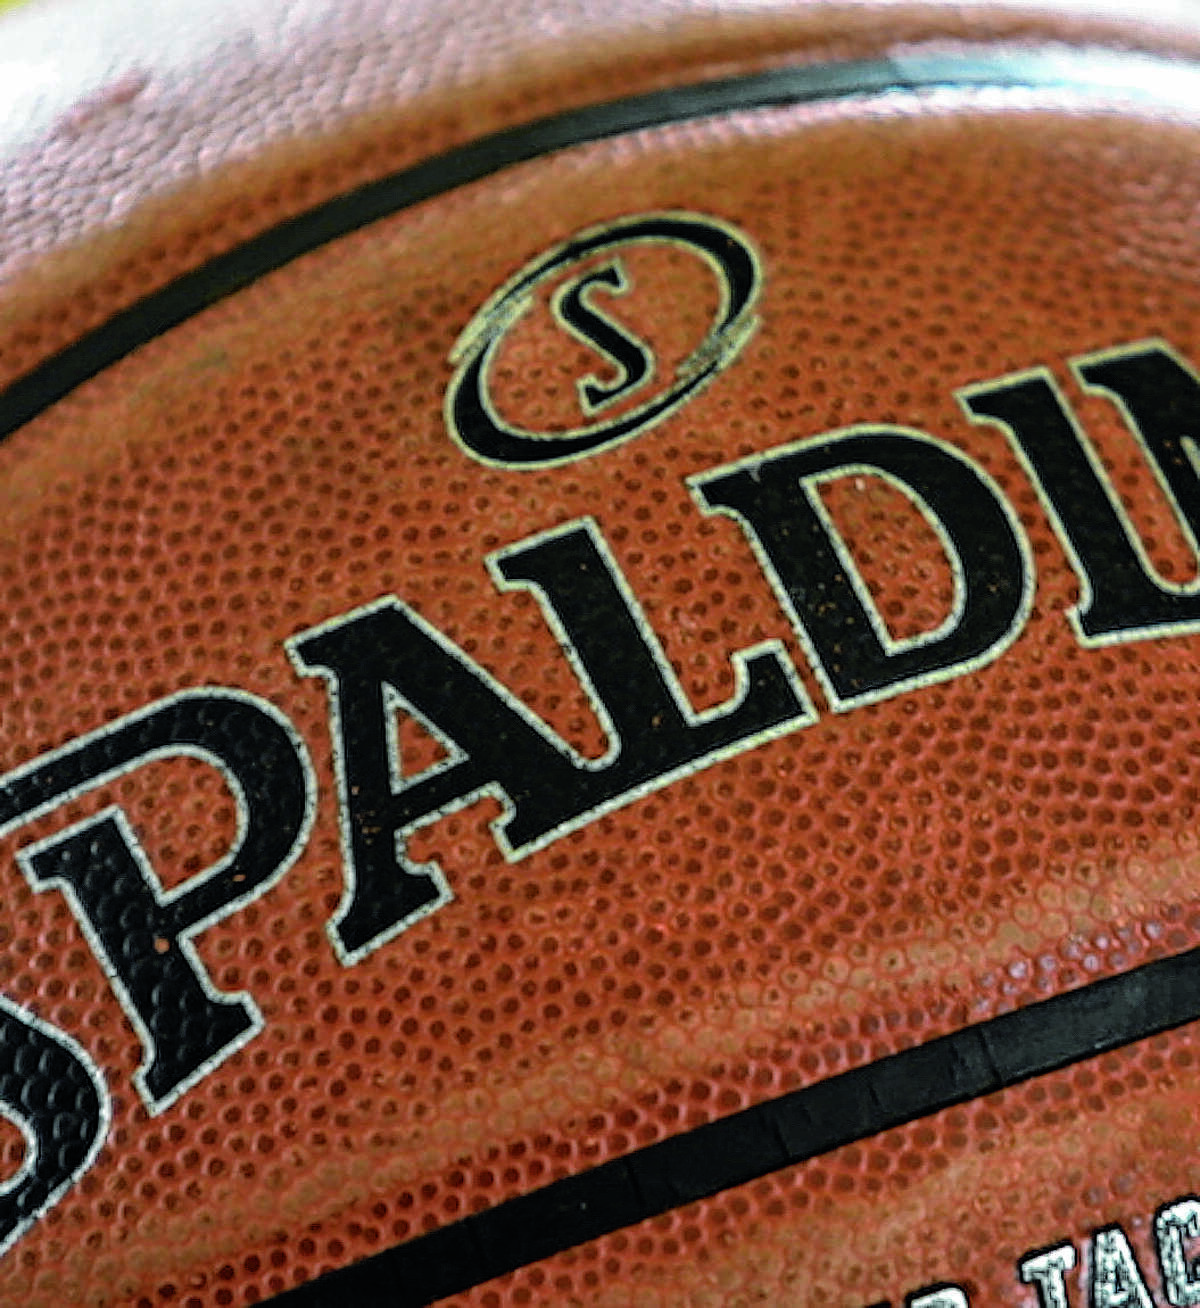 Statewide boys' and girls' basketball scores for Friday, January 14